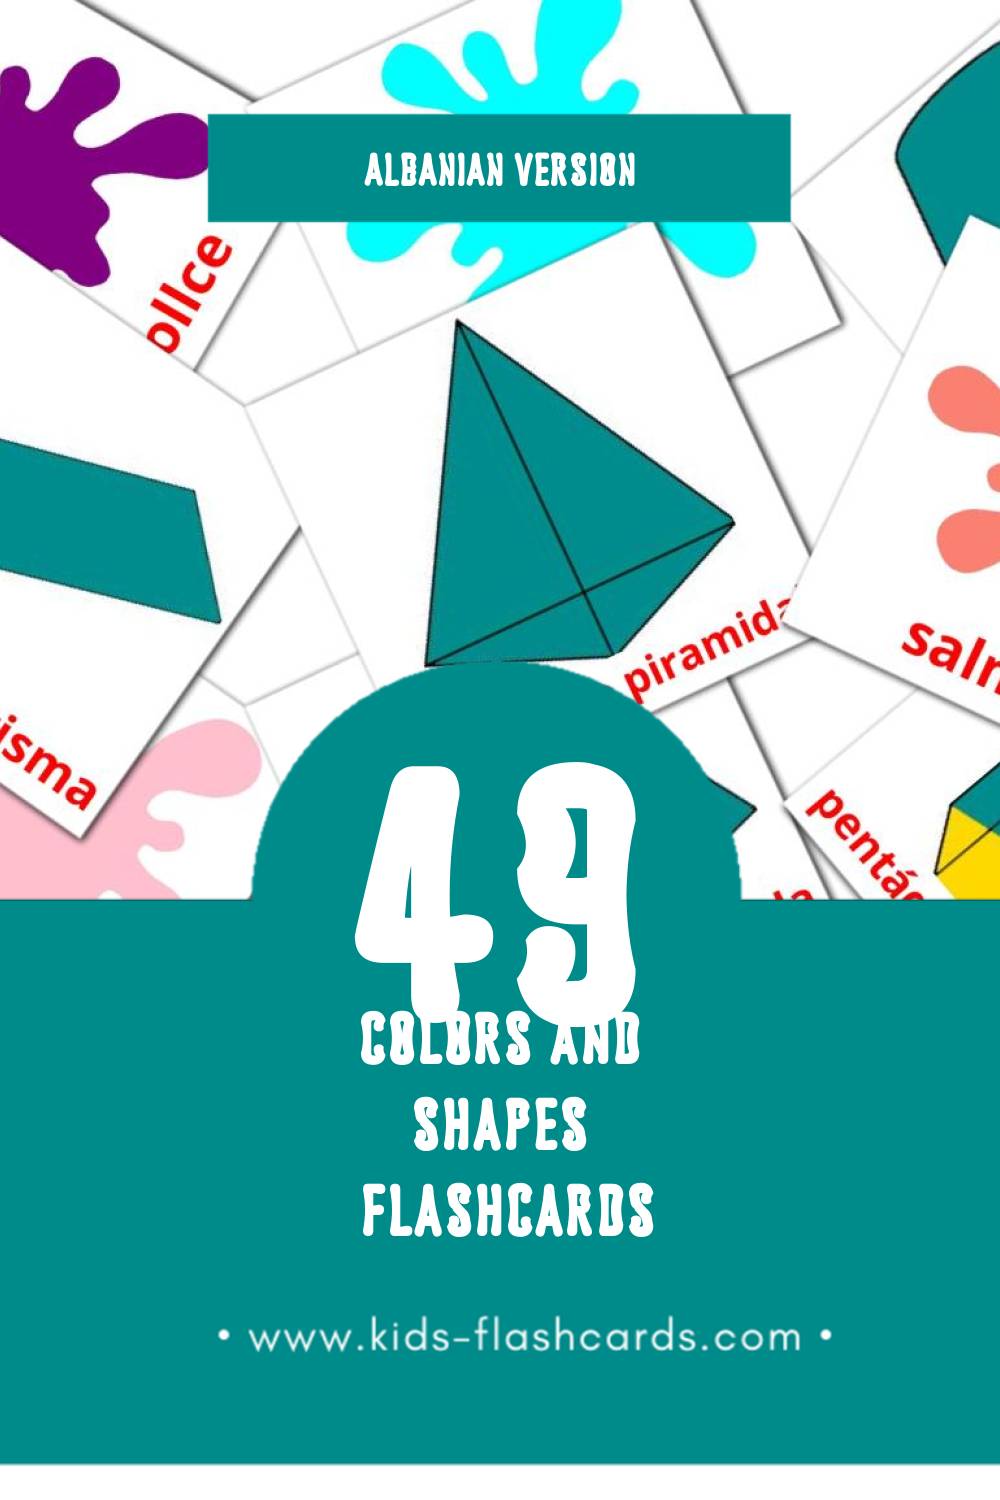 Visual 颜色和形状 Flashcards for Toddlers (12 cards in Albanian)